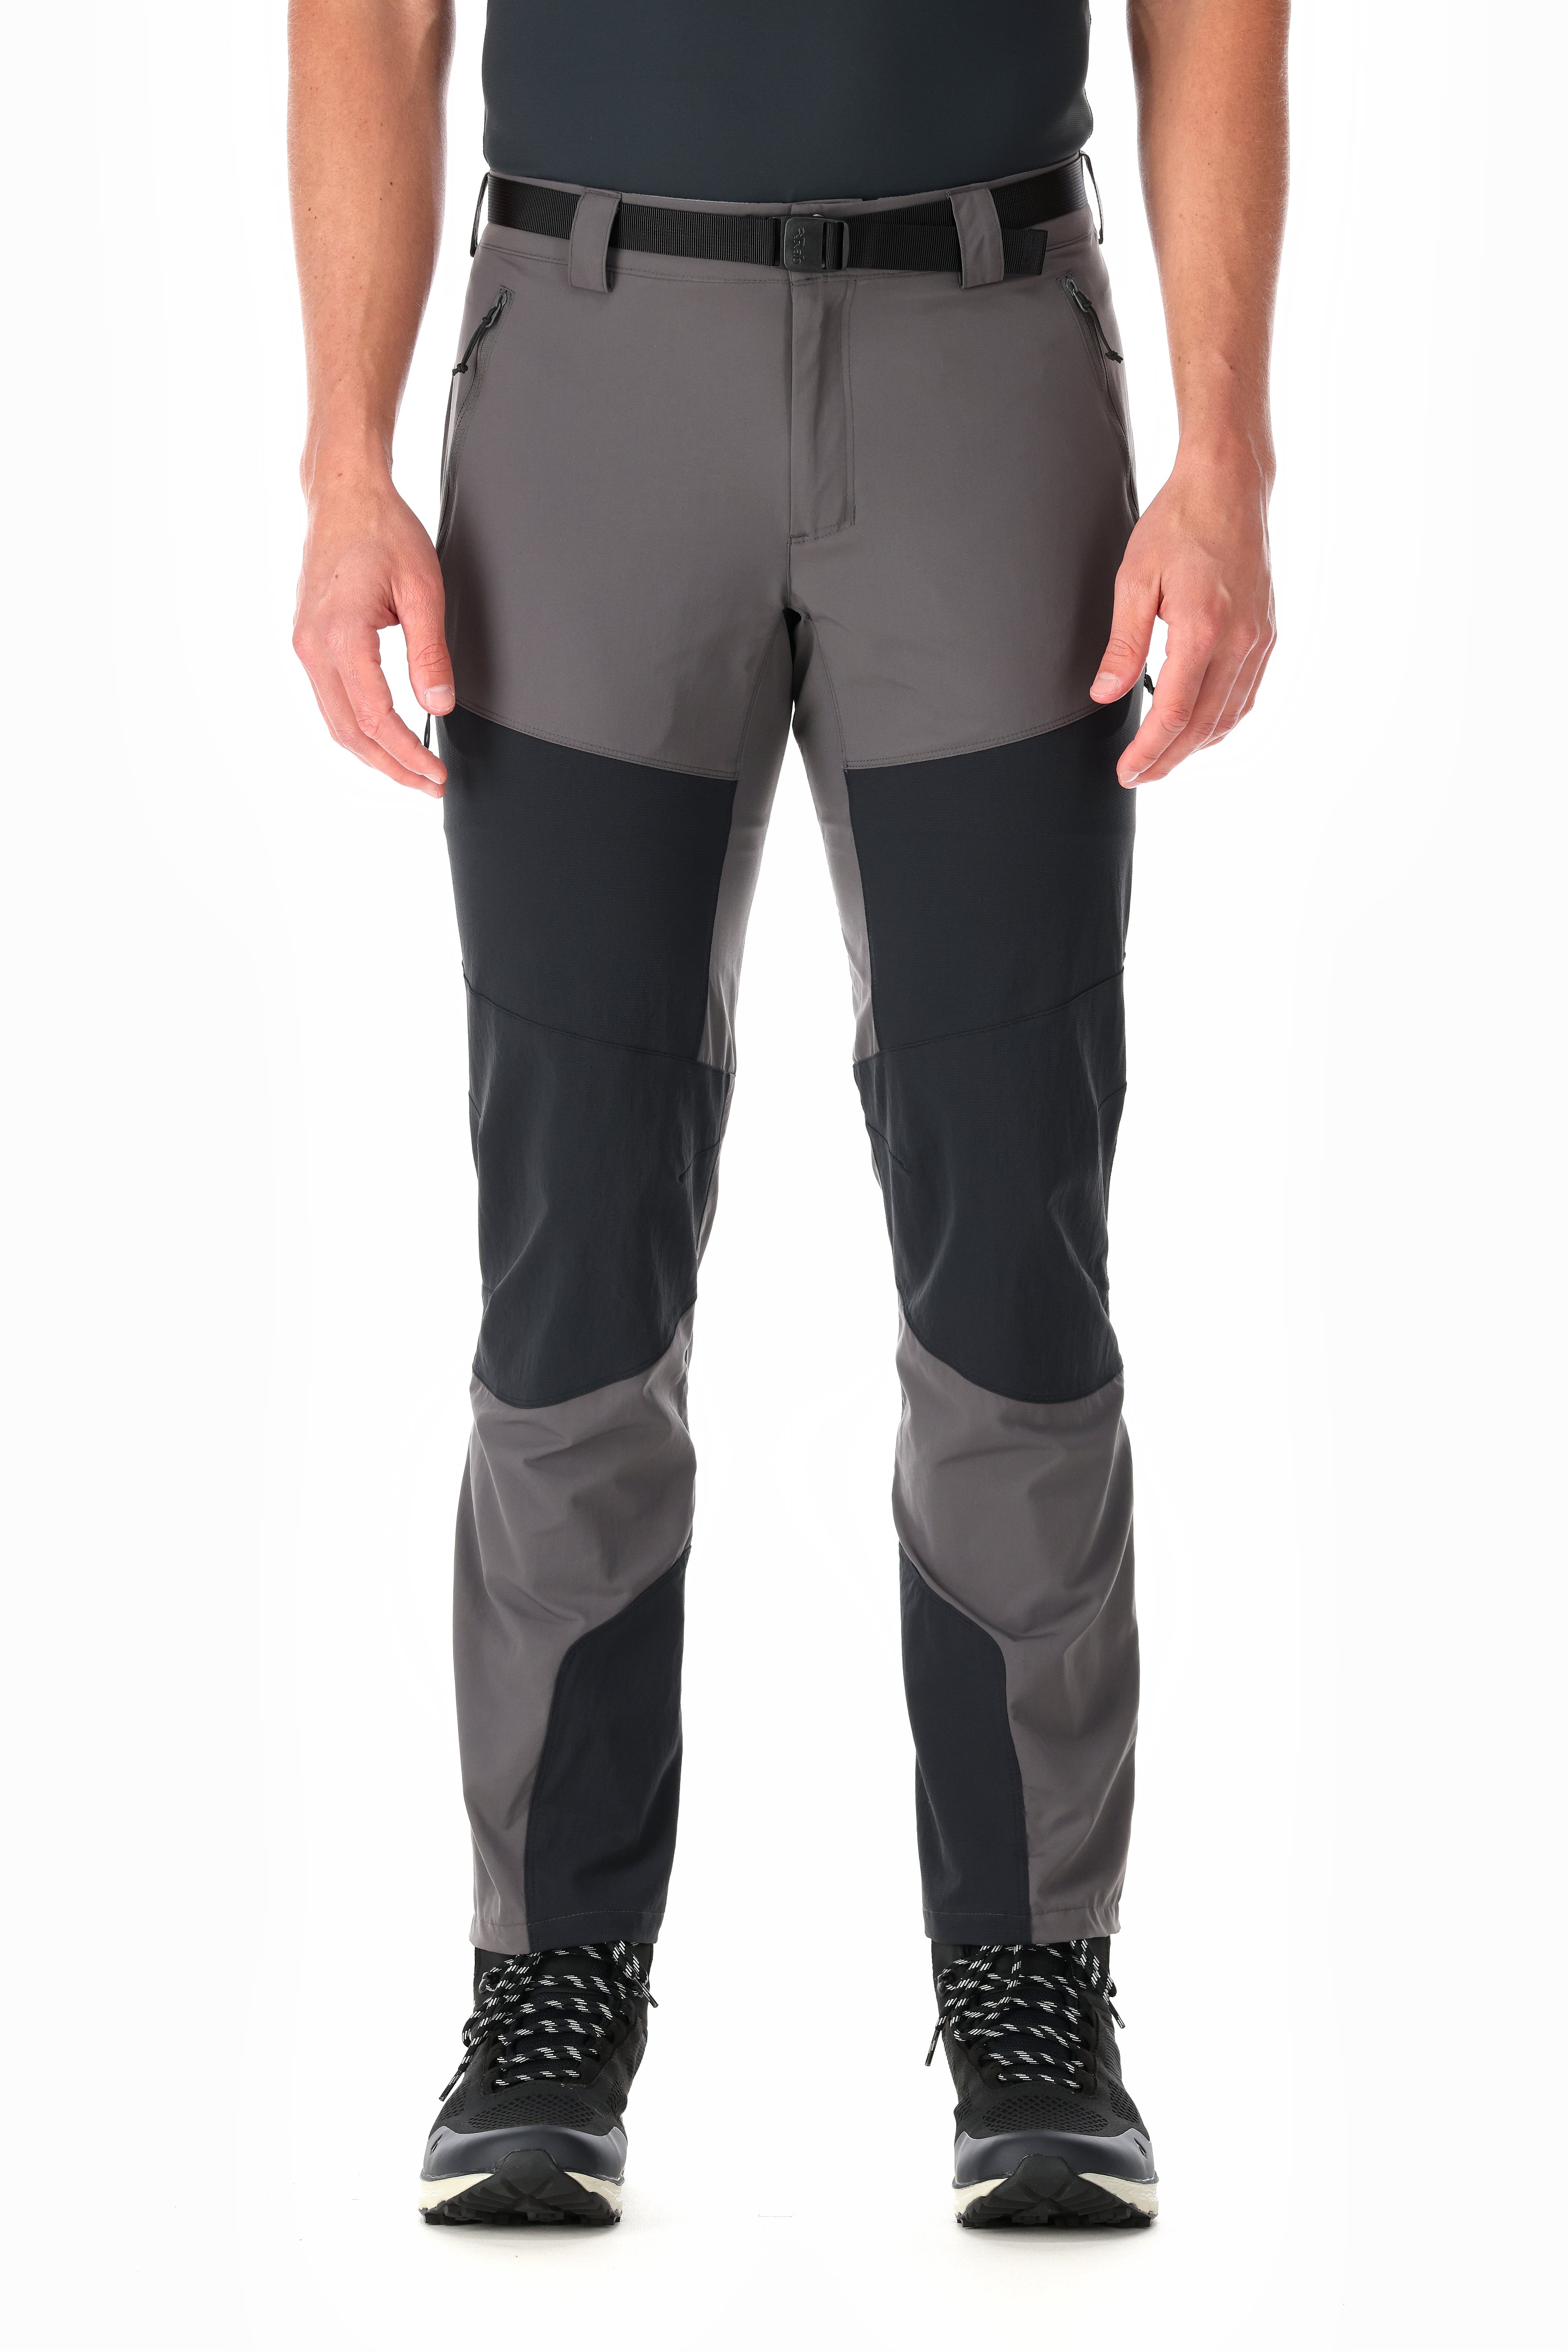 Rab Men's Magma Light Pants - outfittersstore.nz